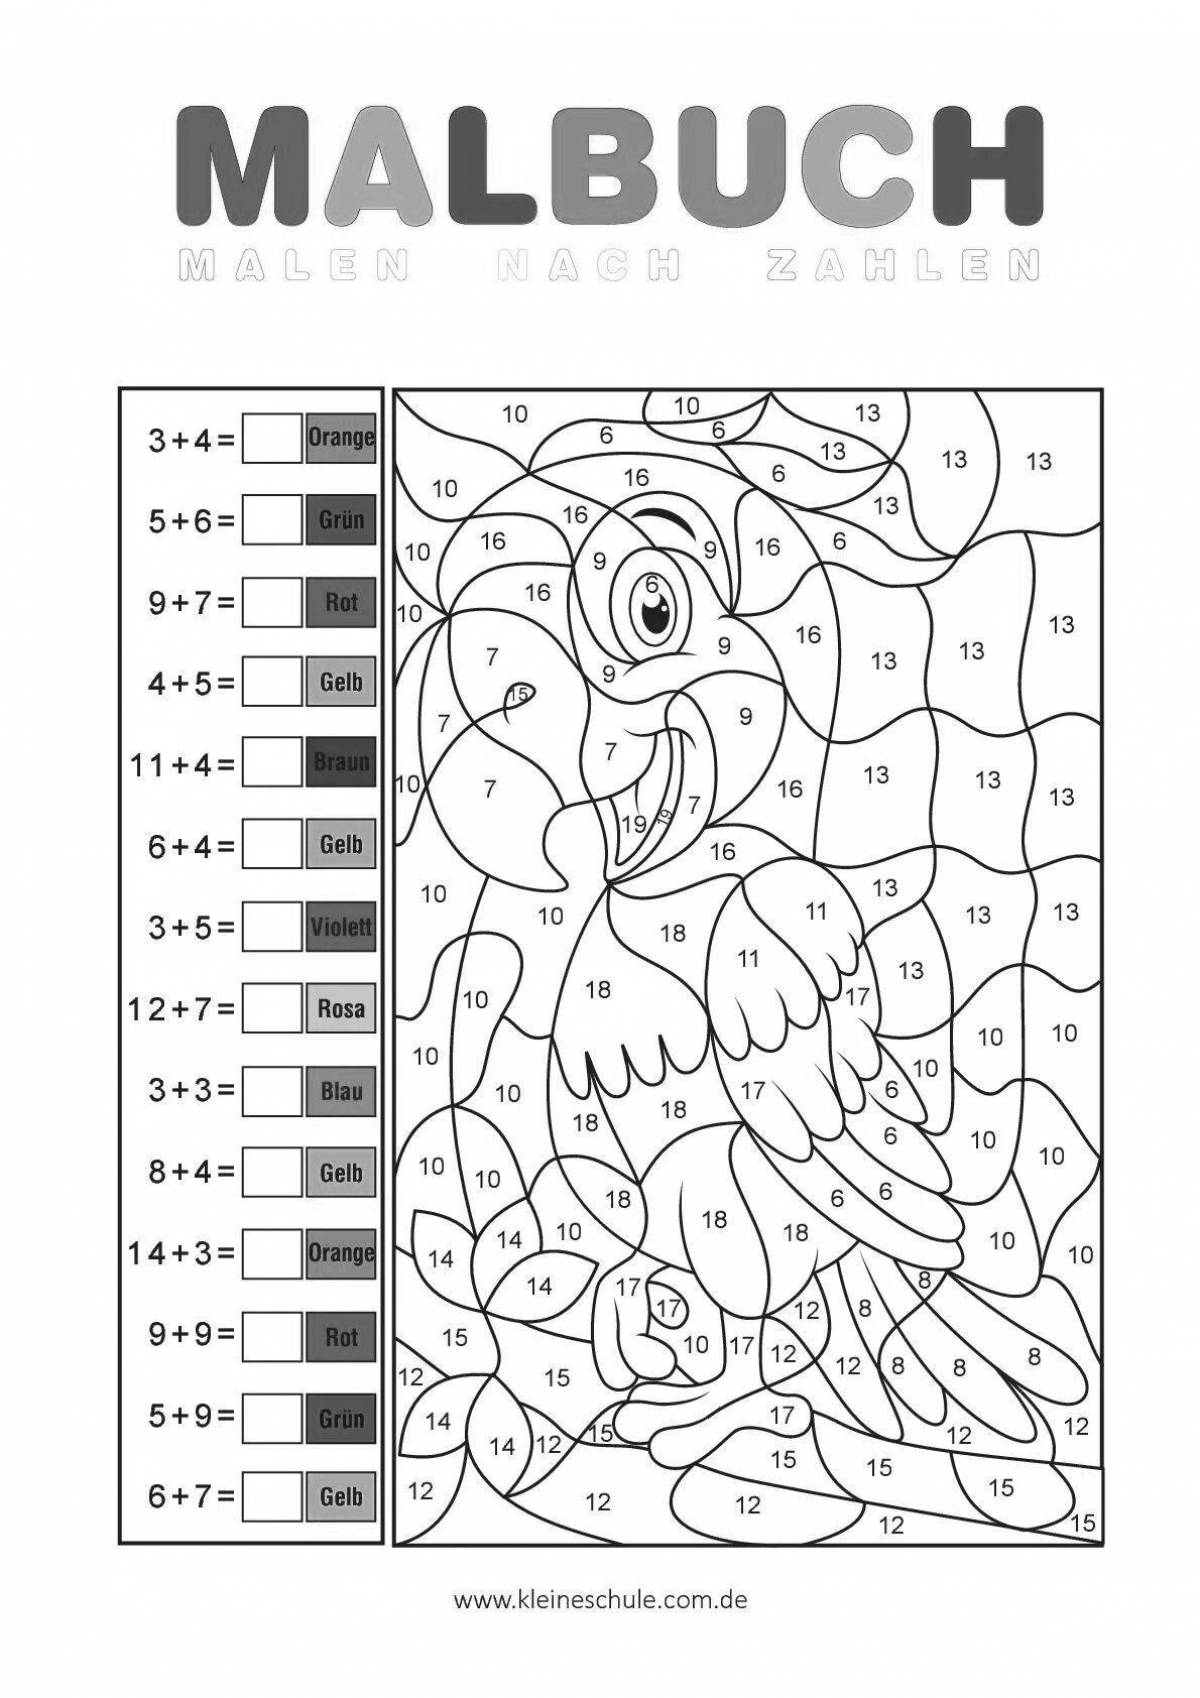 Educational coloring by numbers